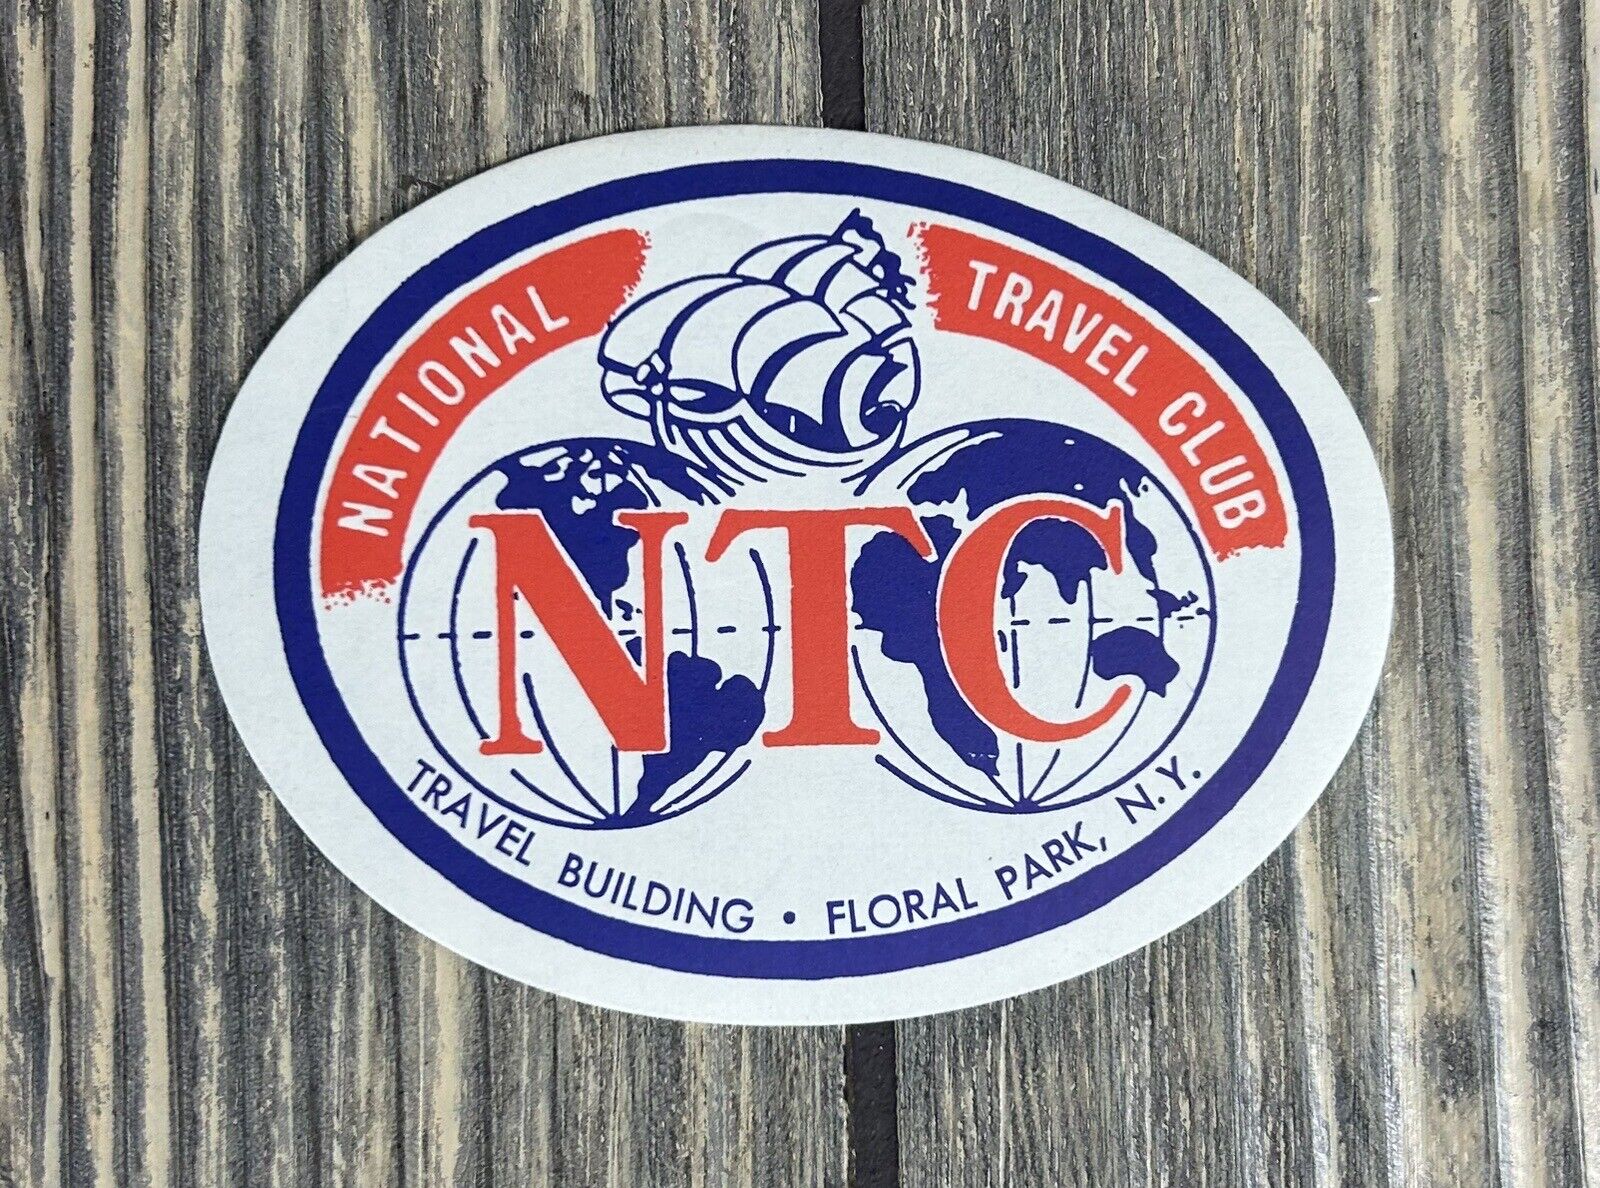 VTG National Travel Club NTC Floral Park NY Travel Building Round Paper 3.25”